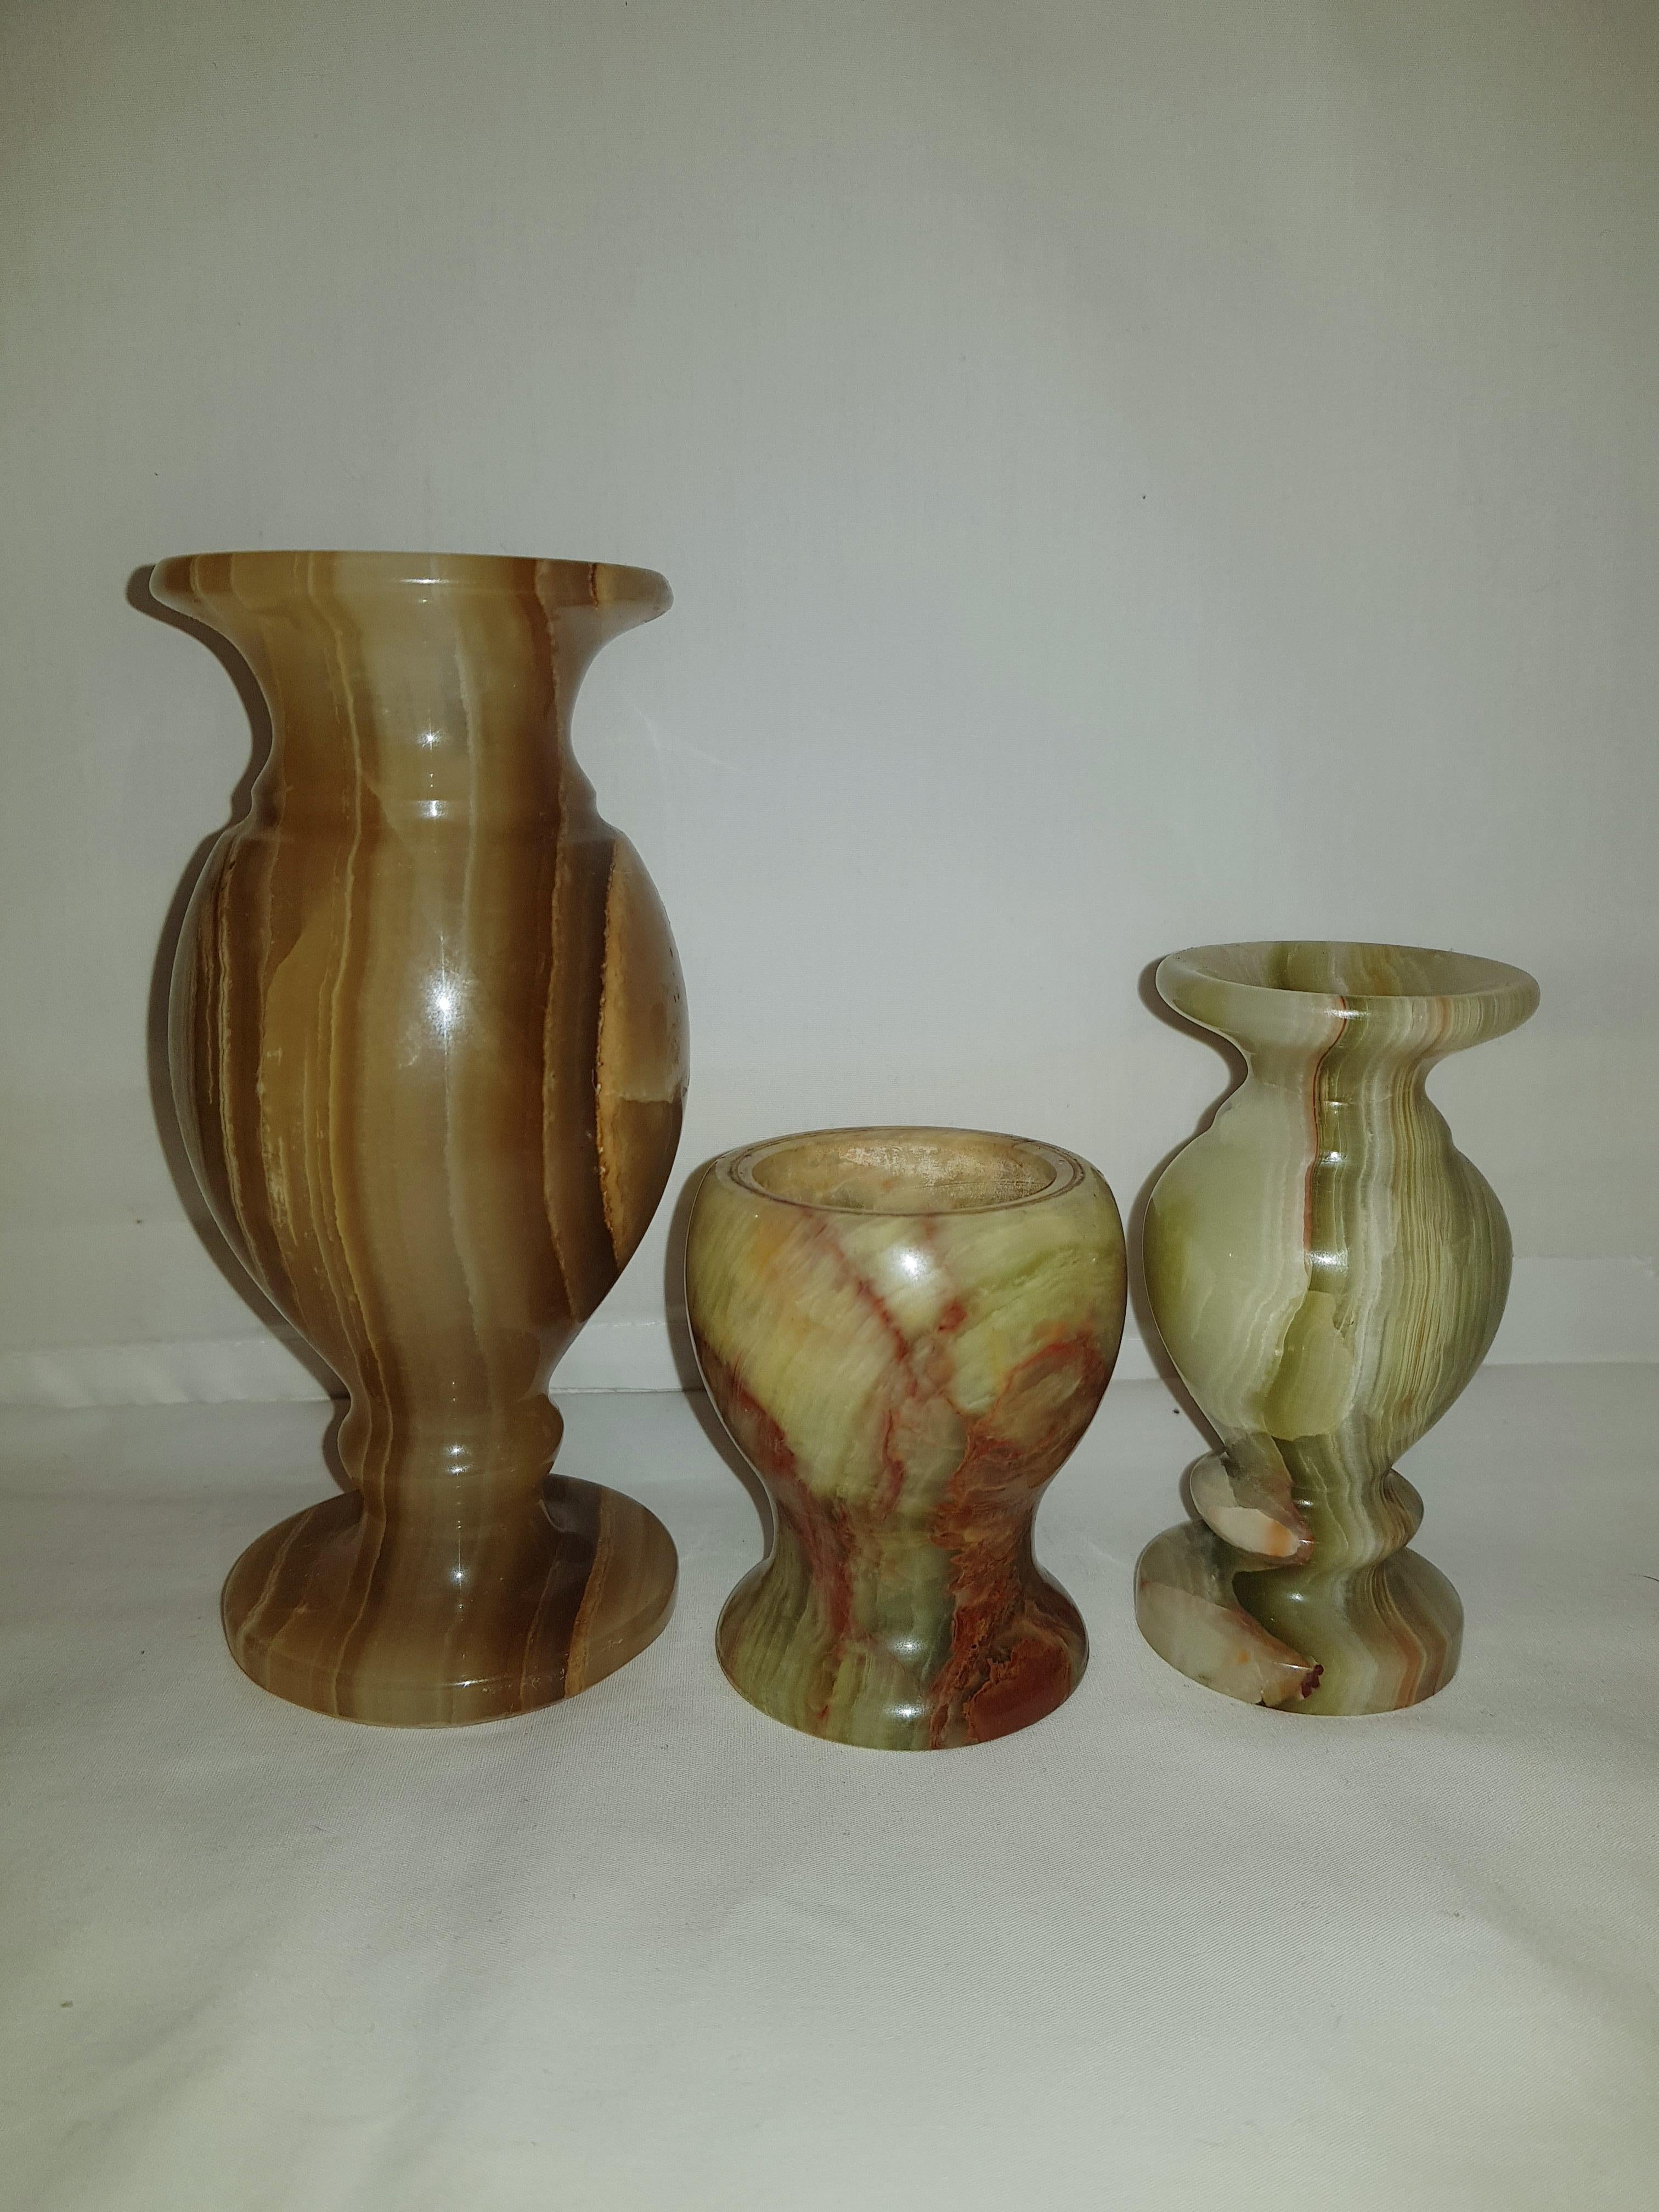 Beautiful set of 3 hand crafted onix natural stone decorative vases brilliant condition, beautiful home decor.